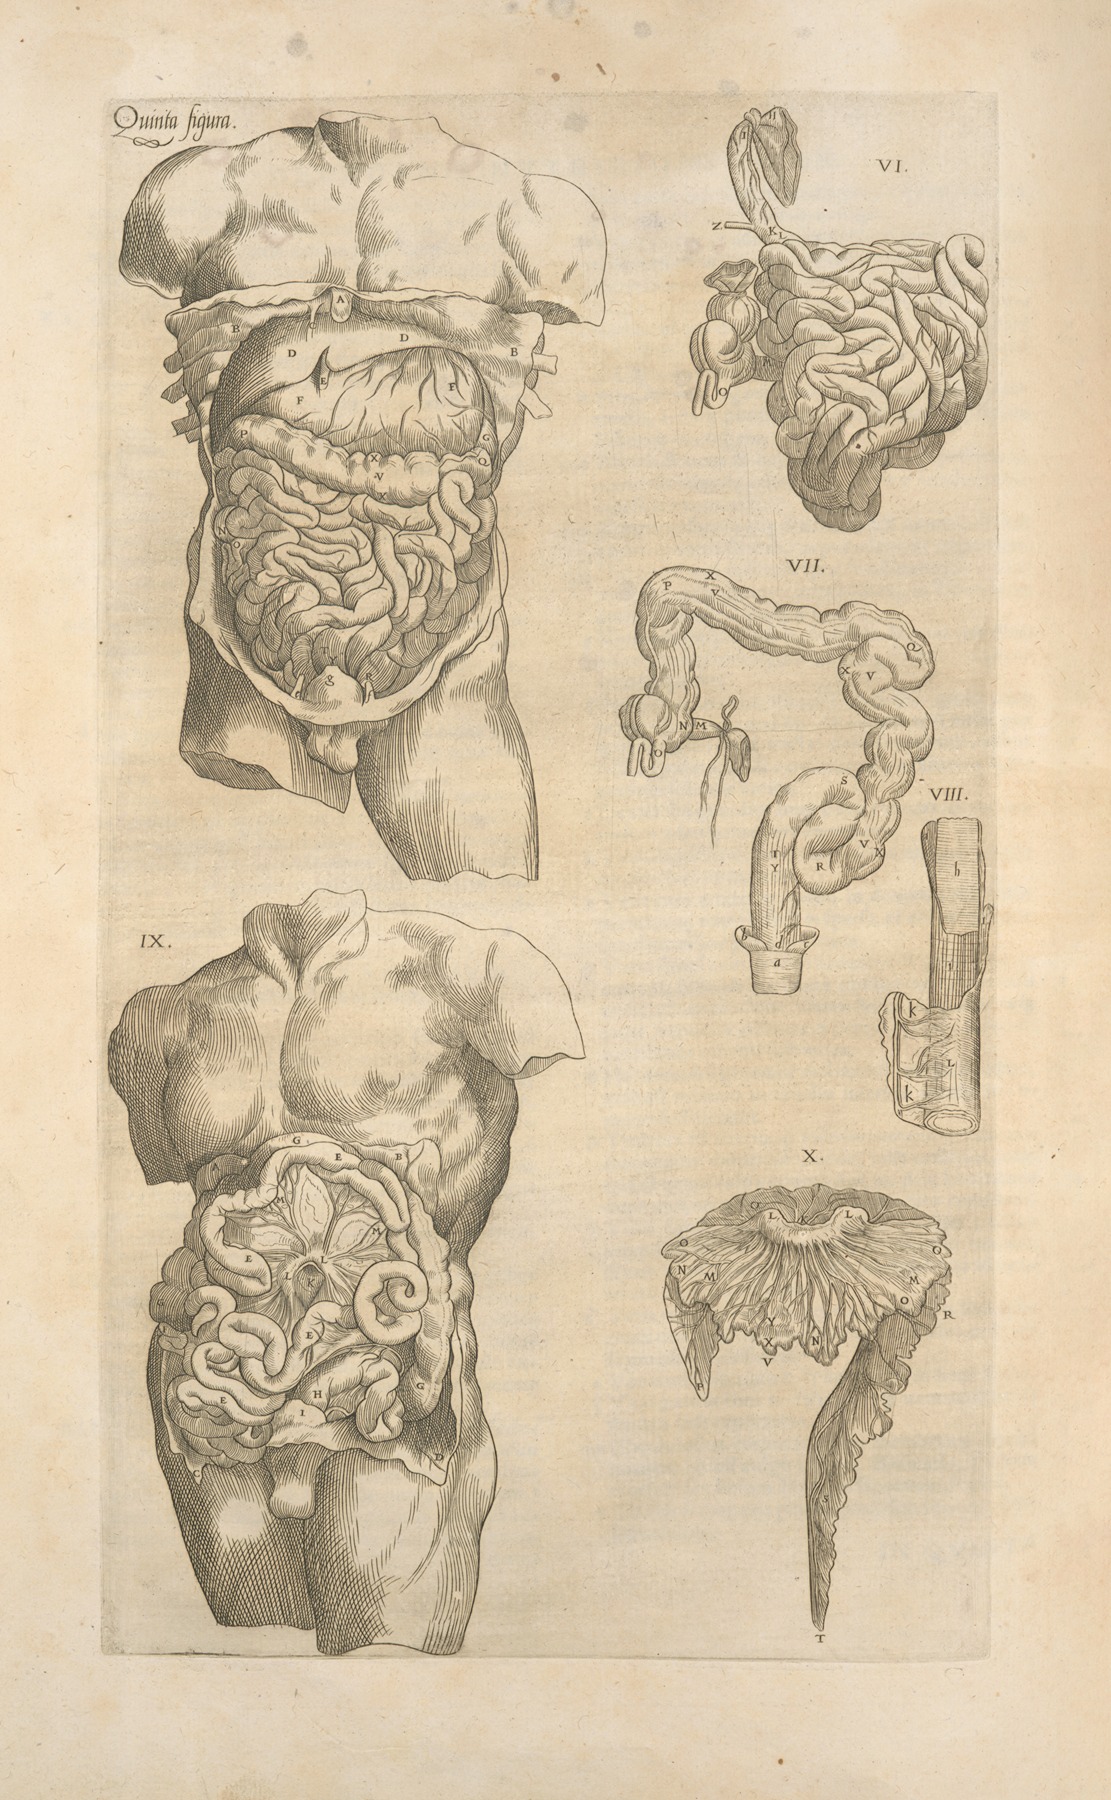 Thomas Geminus - Quinta figura. [Digestive tract, another view]